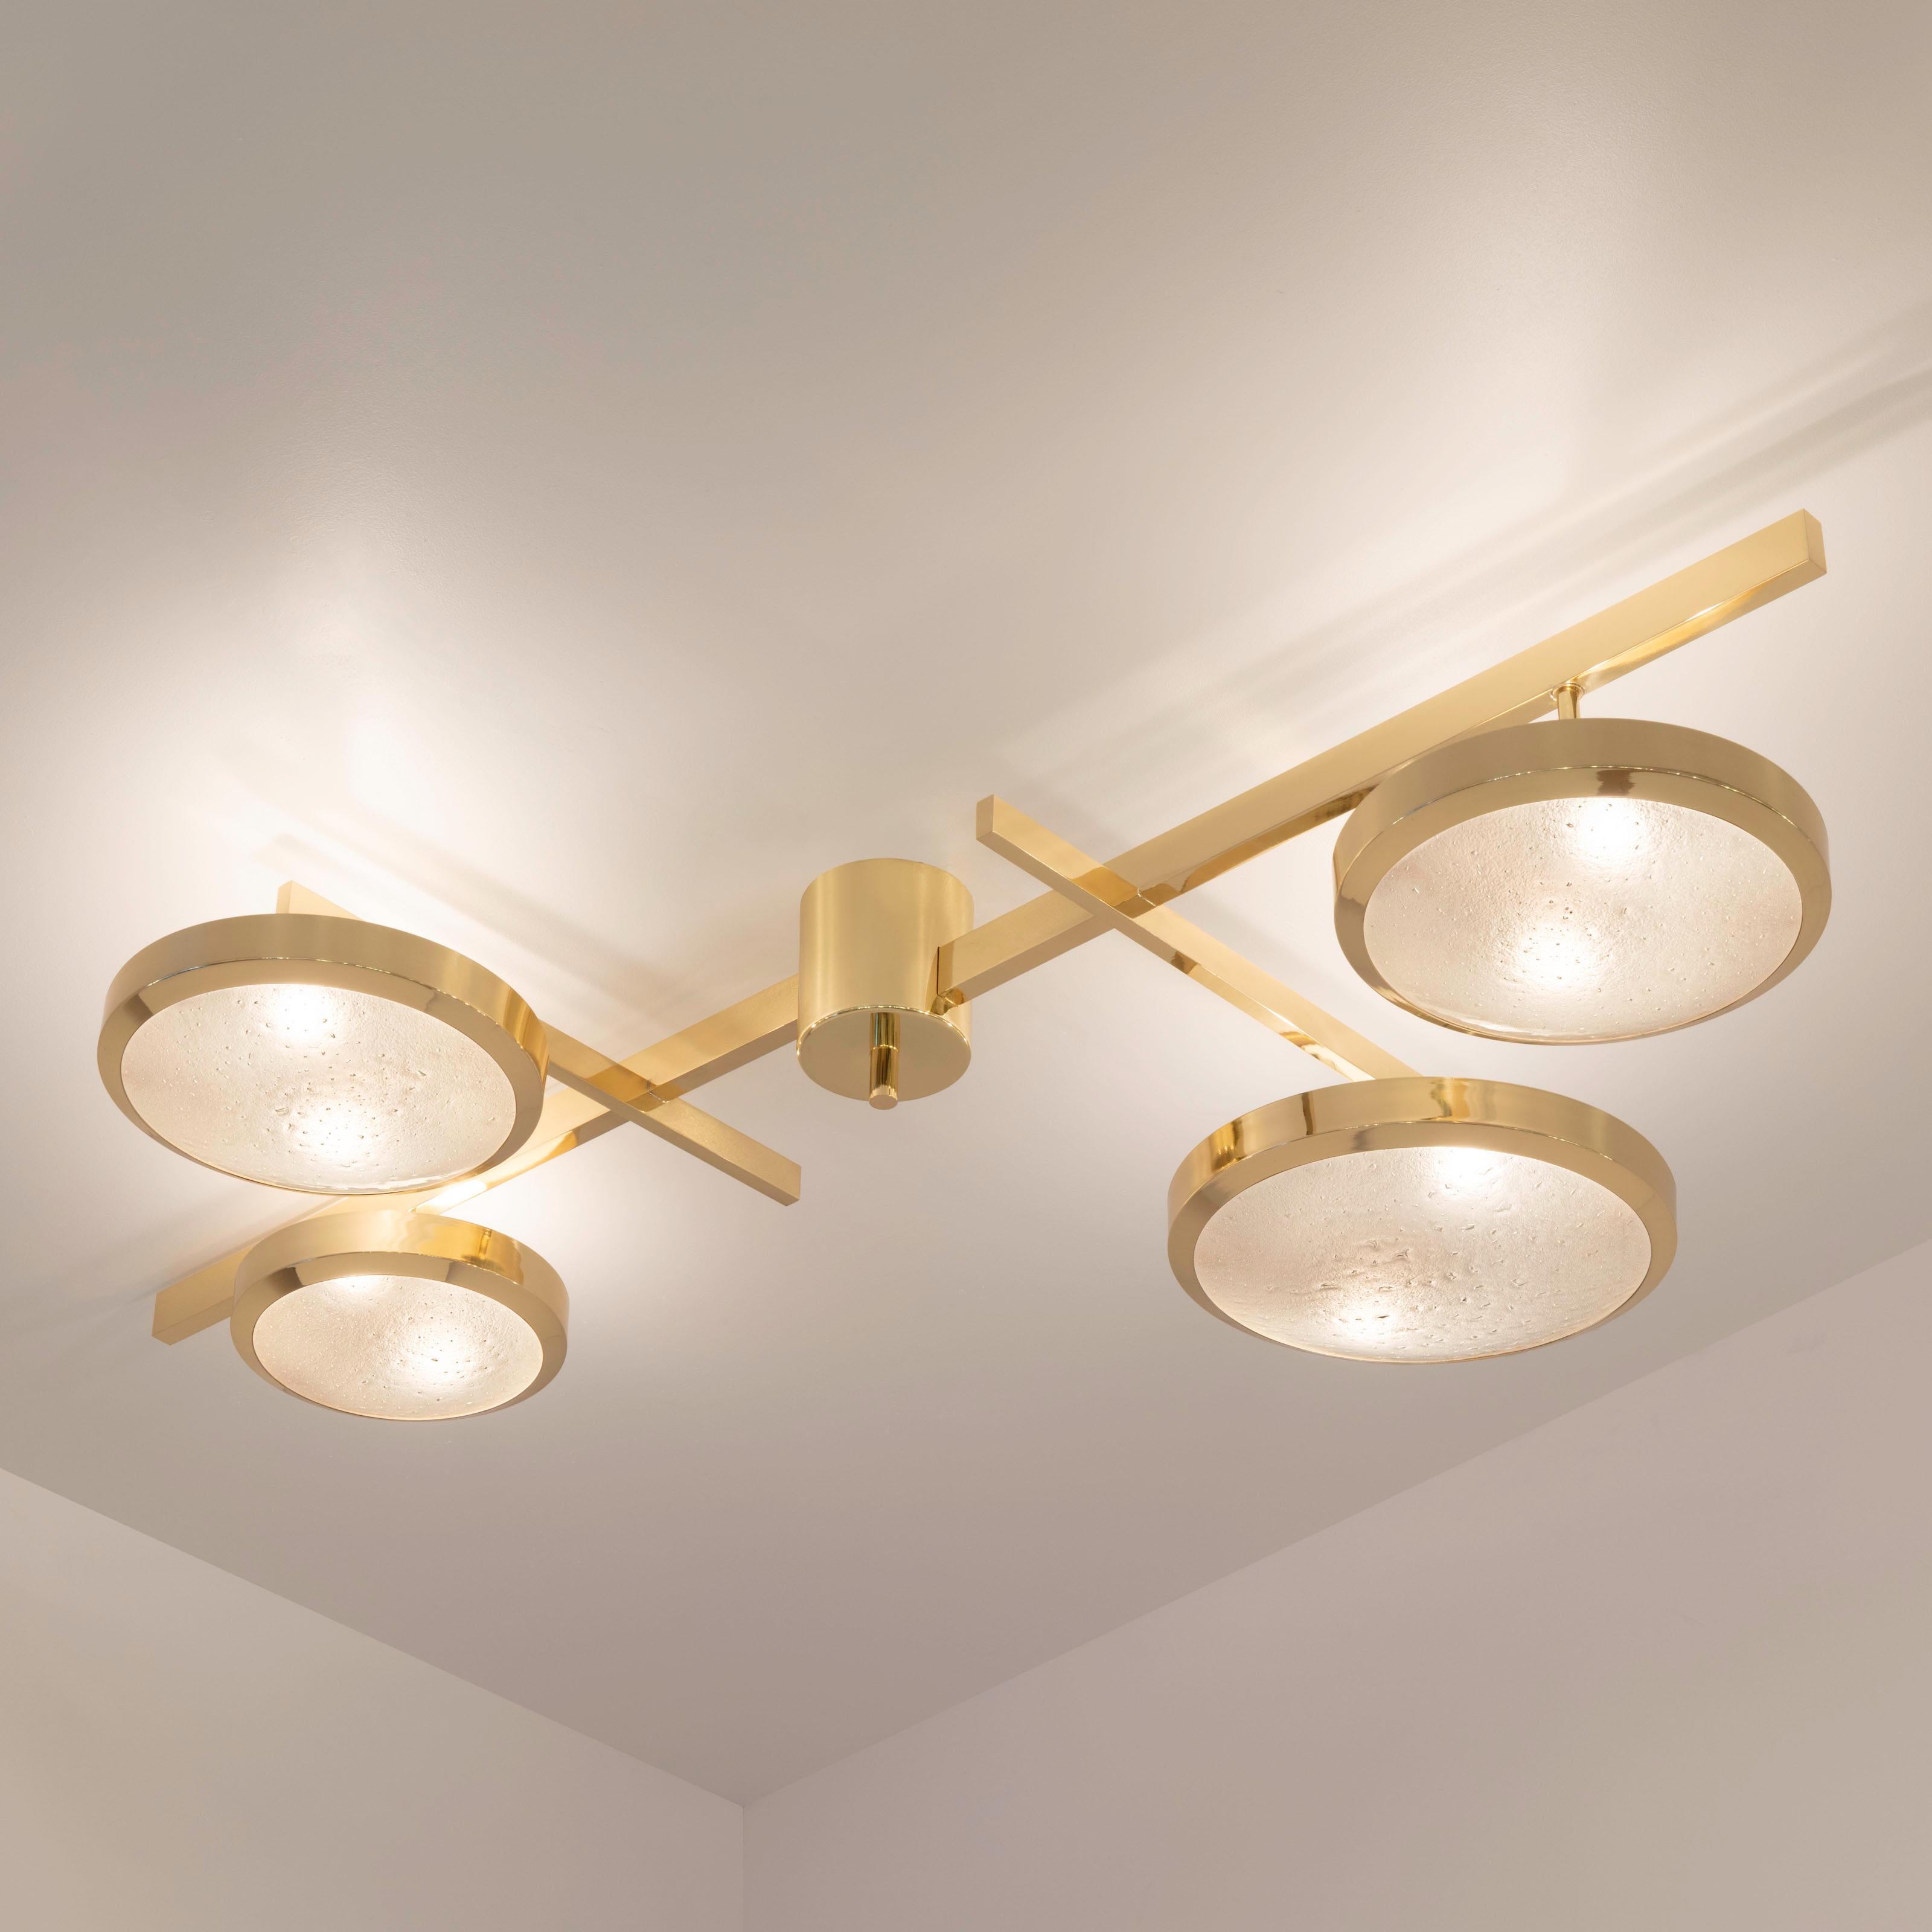 Contemporary Tetrix Ceiling Light by Gaspare Asaro - Satin Nickel Finish For Sale